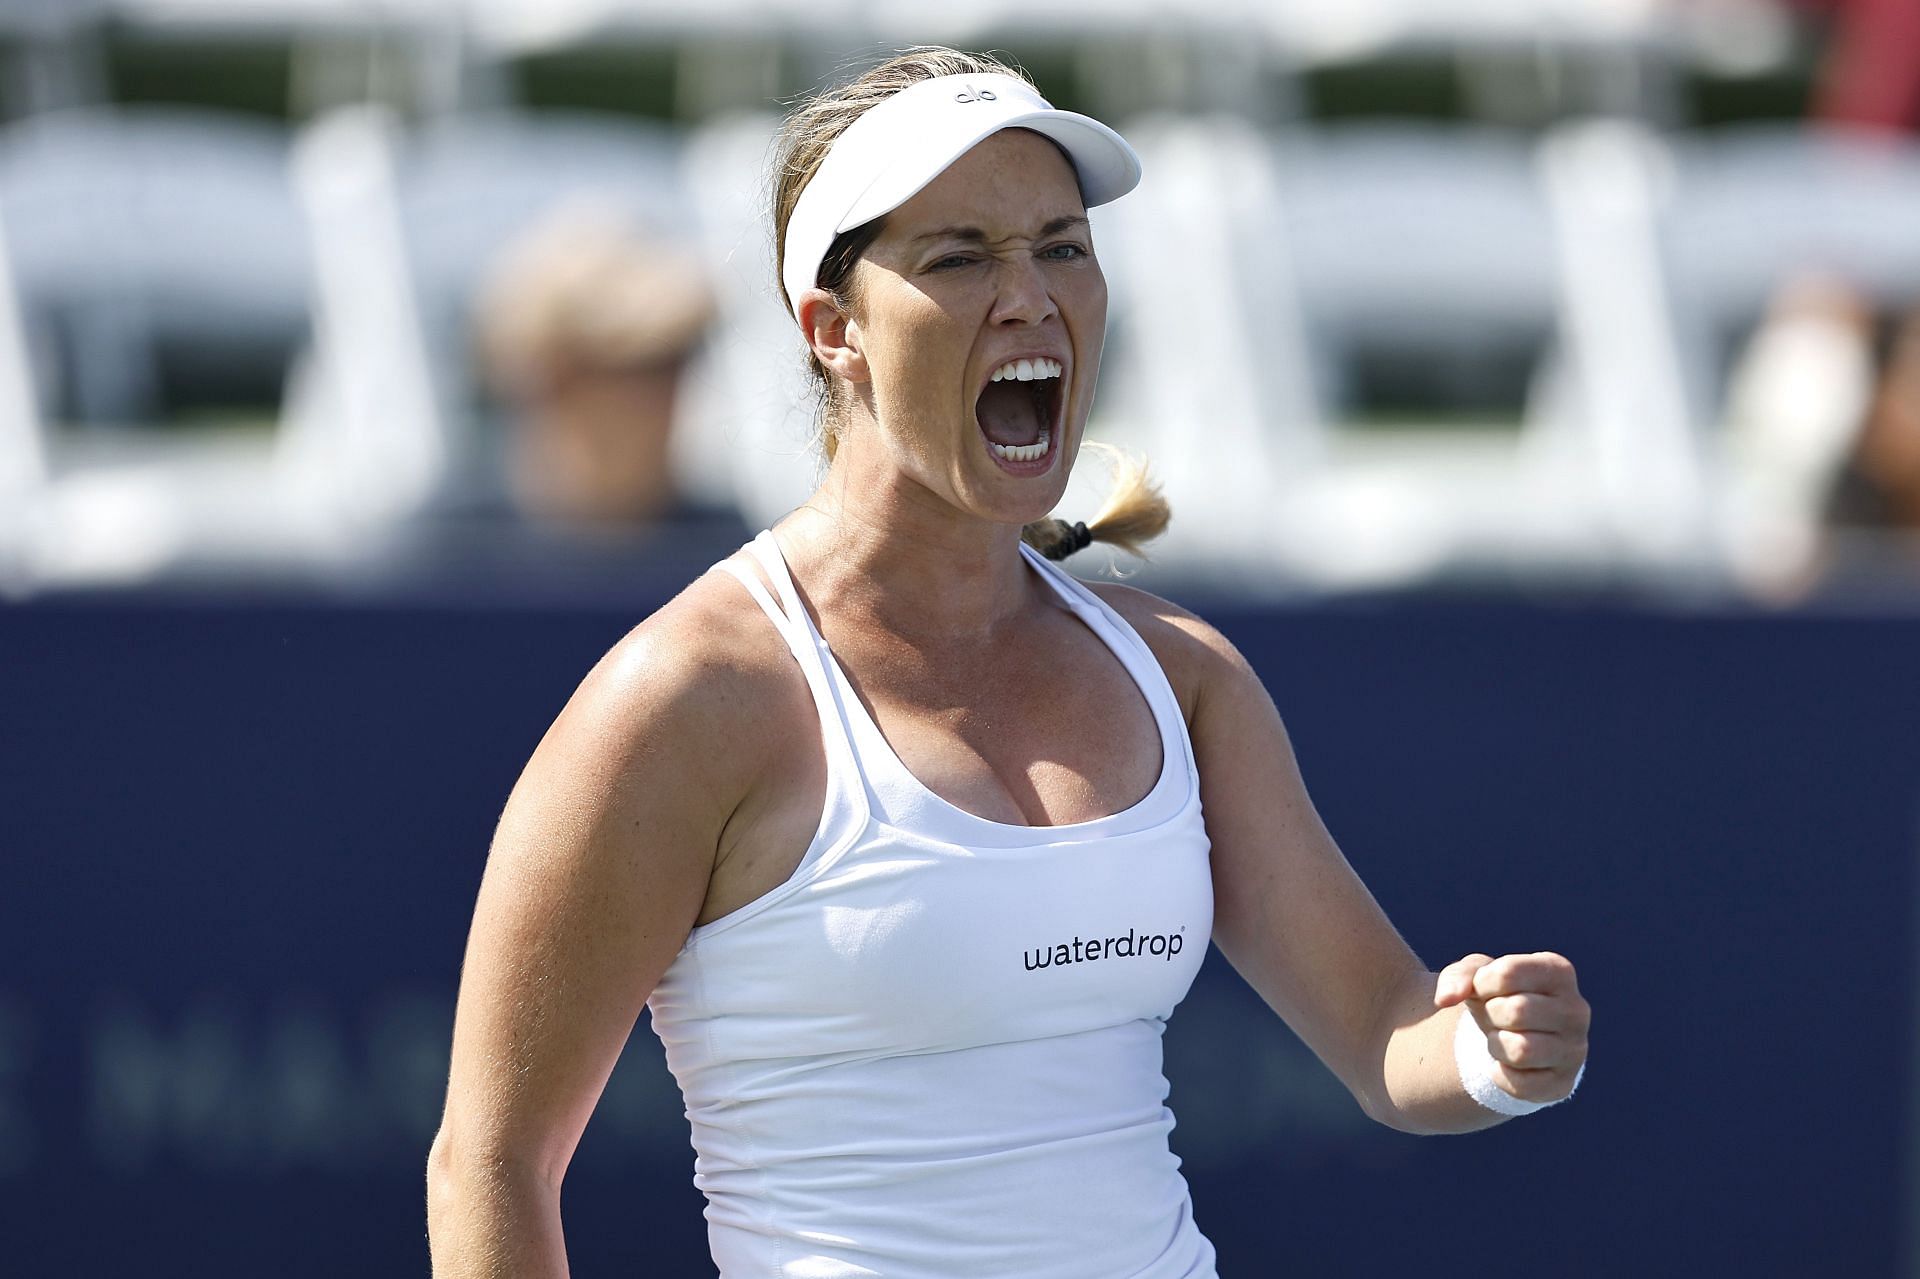 Collins will look to make a deep run at the WTA 1000